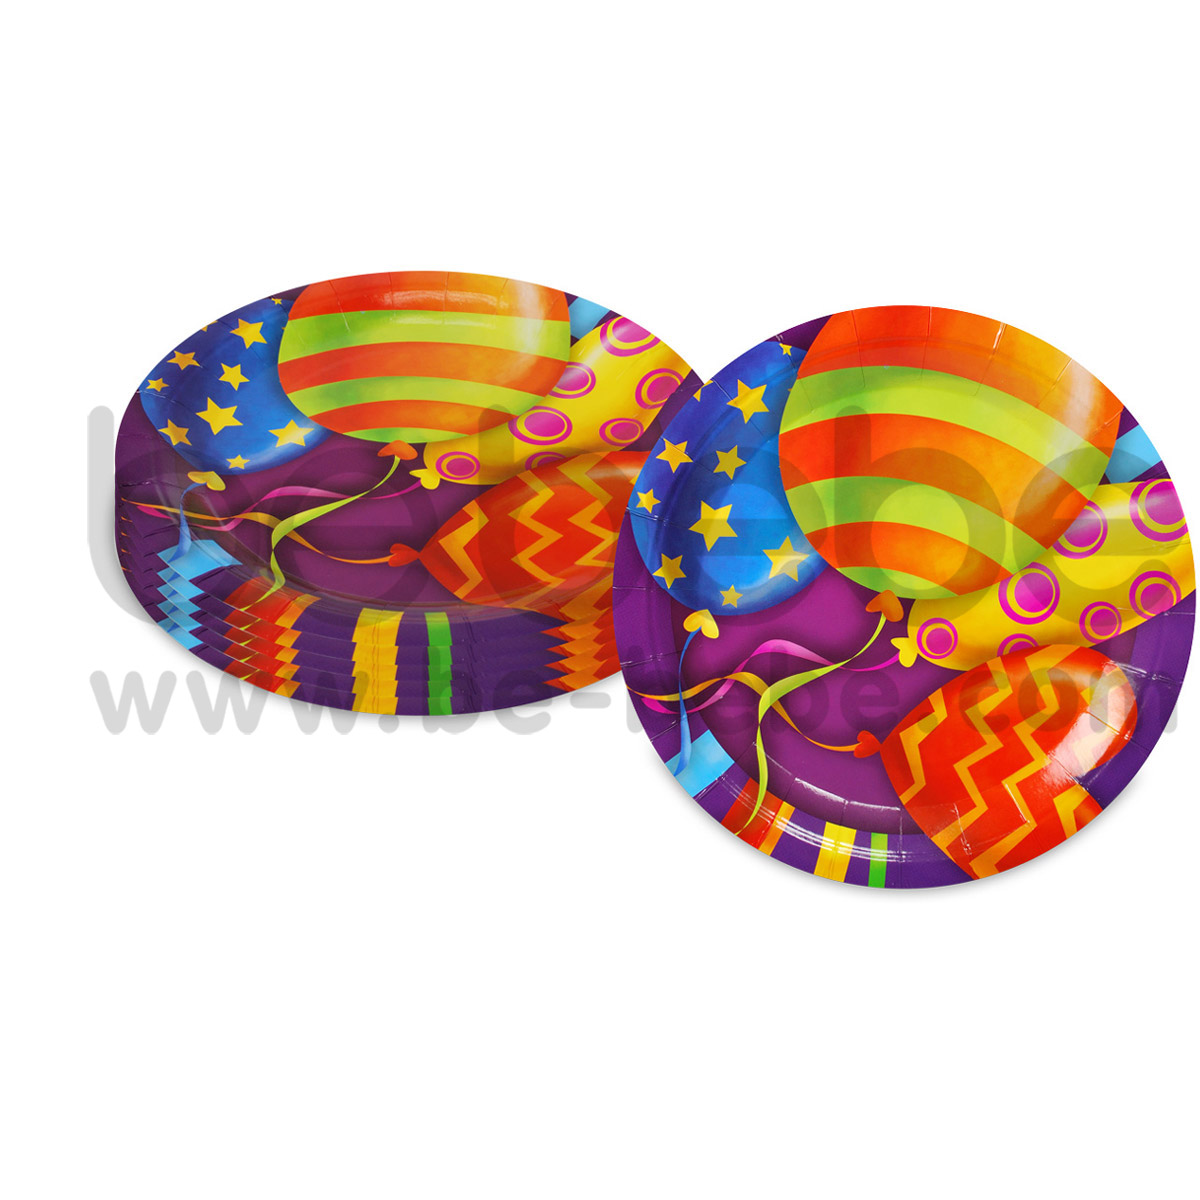 PARTY BUG : Paper plate 9 inch., 6 Packs